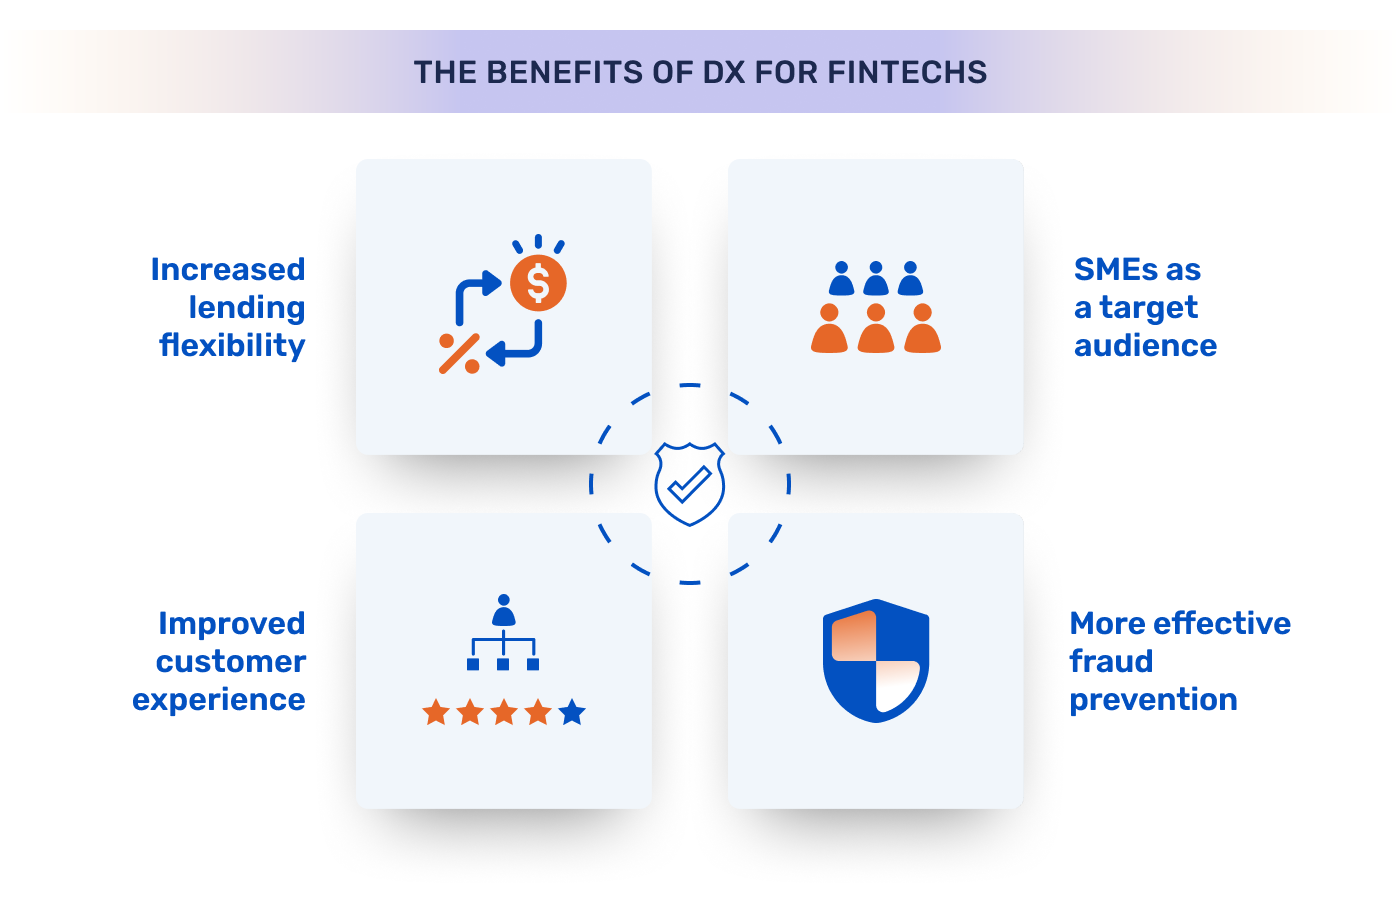 The Benefits of DX for Fintechs